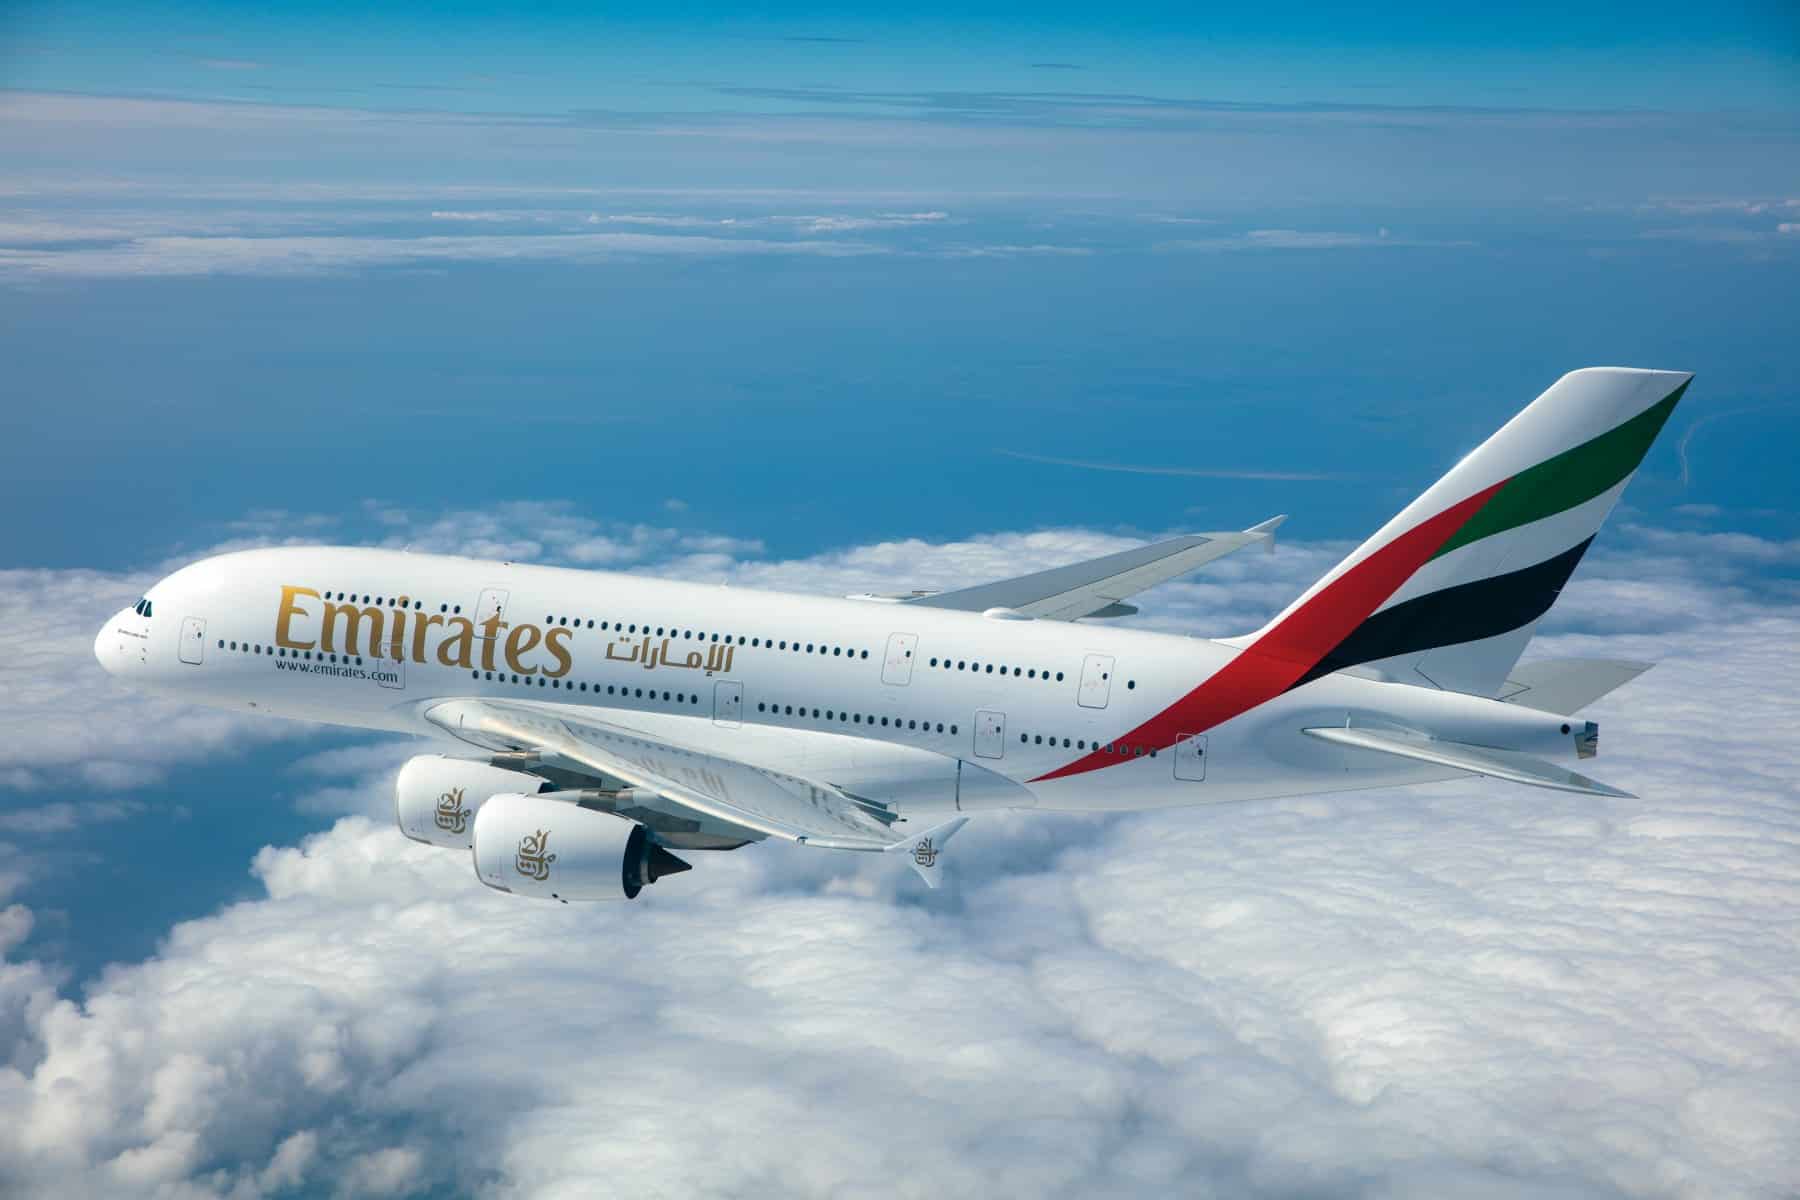 Lufthansa awarded Emirates A380 landing gear and base maintenance contracts